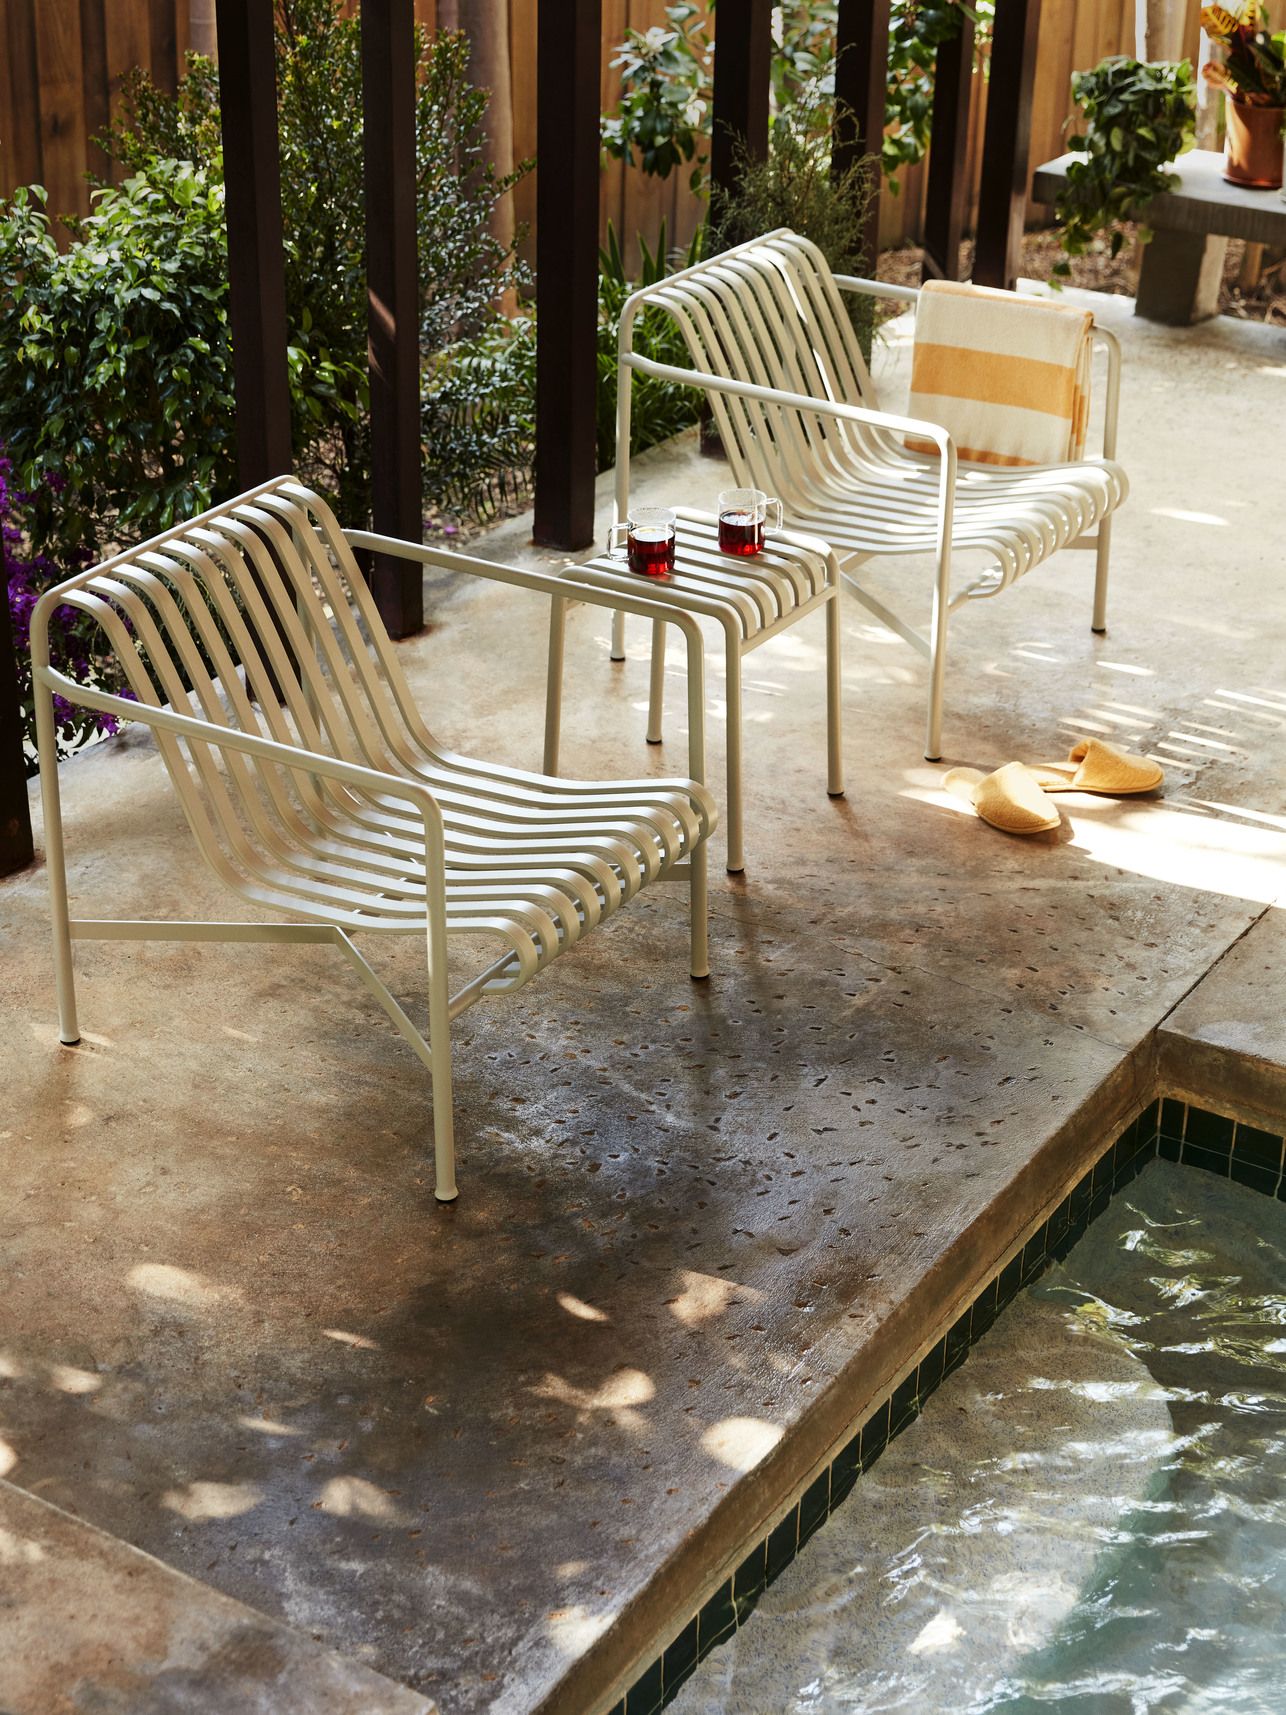 Terrace Chairs The Best Outdoor Seating Options for Your Patio or Deck